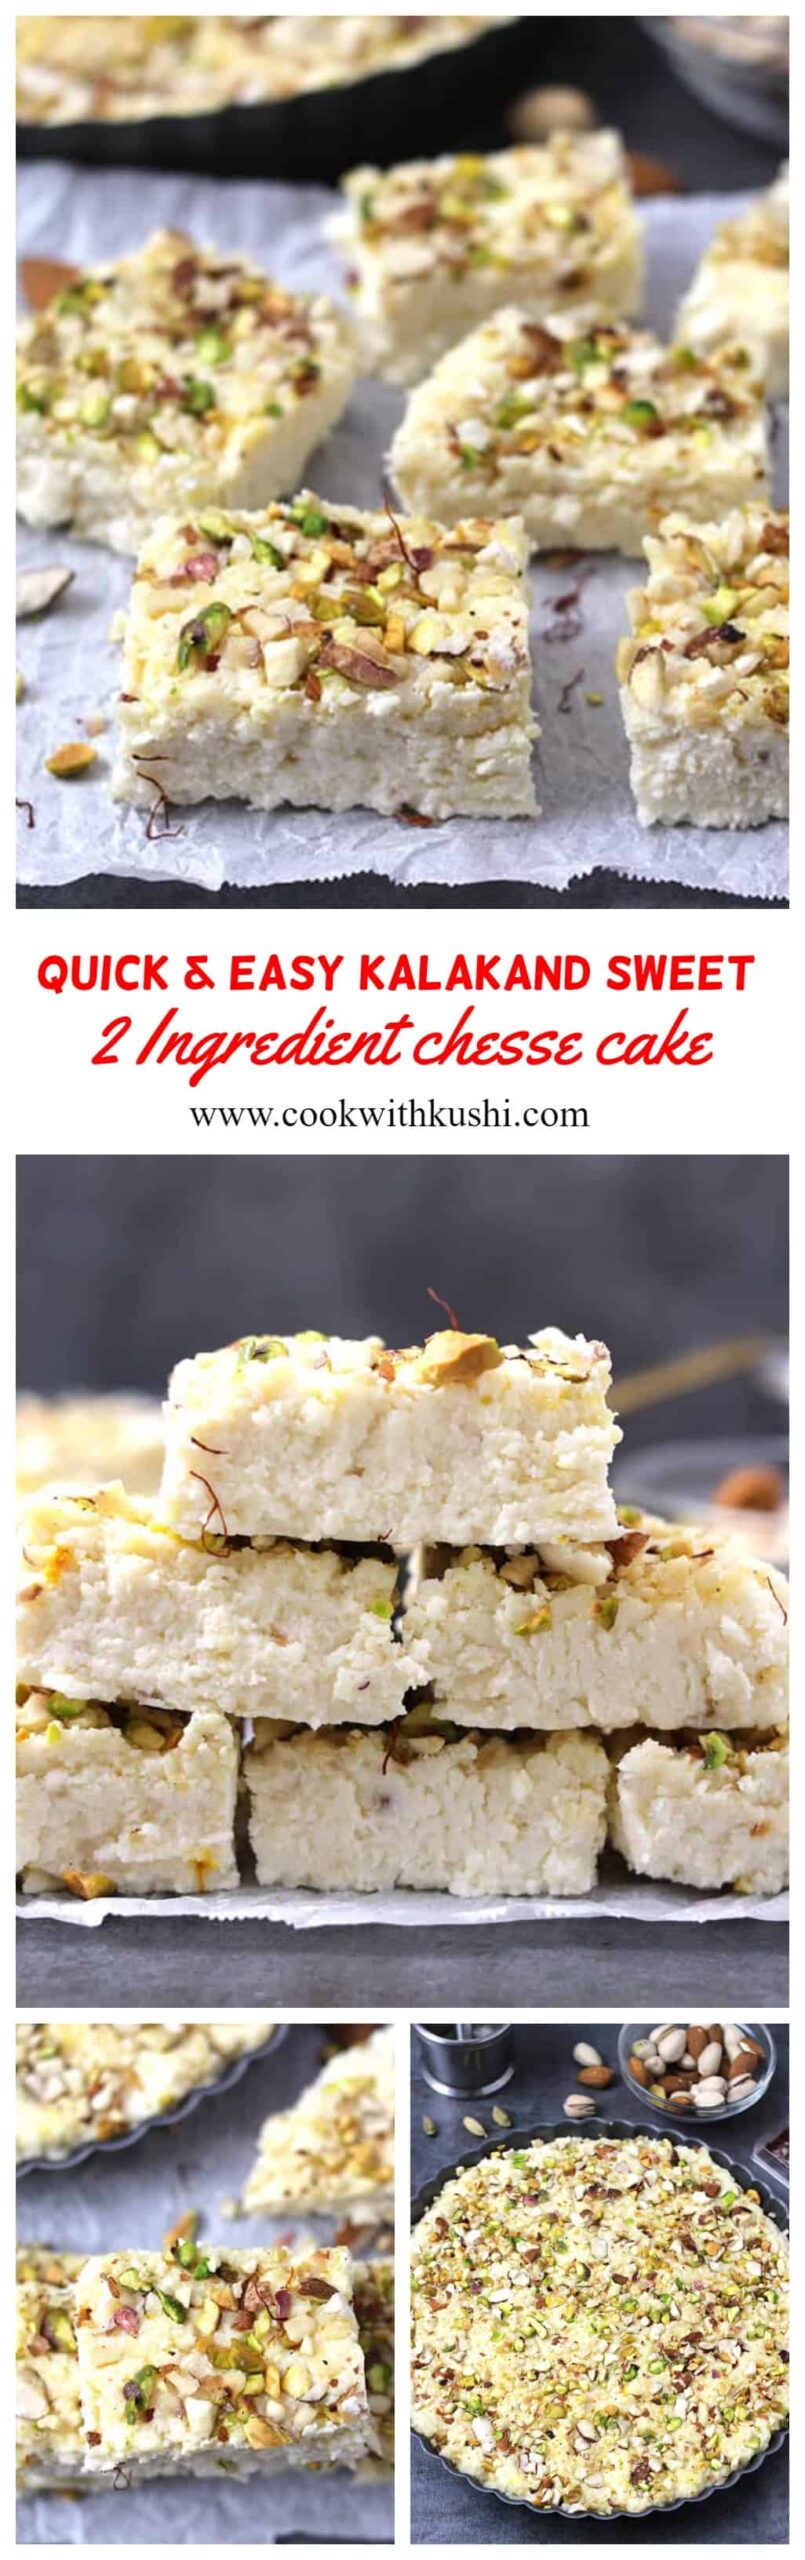 How to make quick & easy instant Indian kalakand sweet recipe 